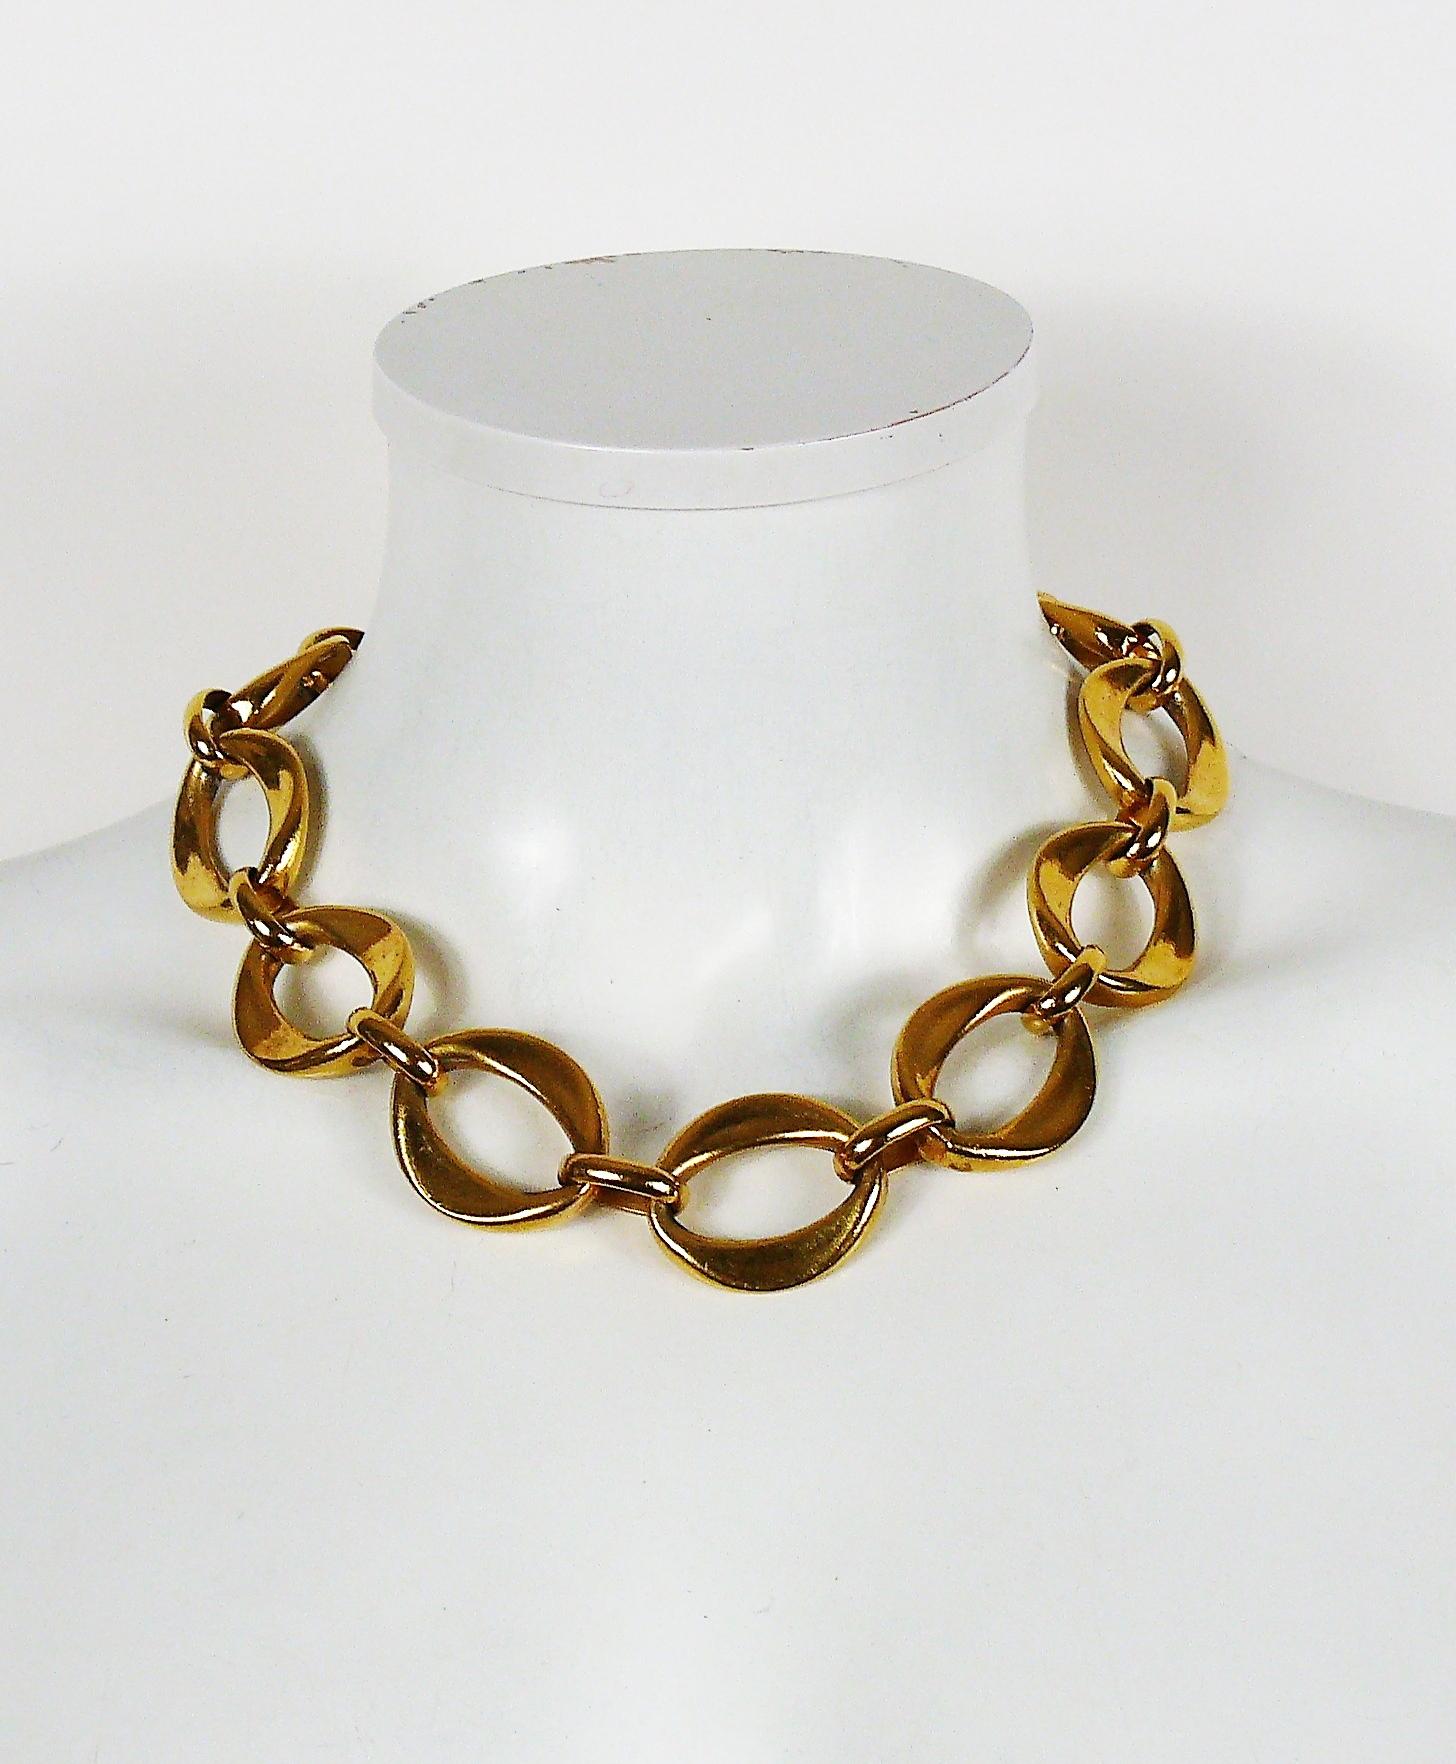 CHANEL vintage gold toned necklace featuring chunky chain links.

Hook closure.

Embossed CHANEL.

Indicative measurements : length approx. 47.5 cm (18.70 inches) / width approx. 2.8 cm (1.10 inches).

JEWELRY CONDITION CHART
- New or never worn :